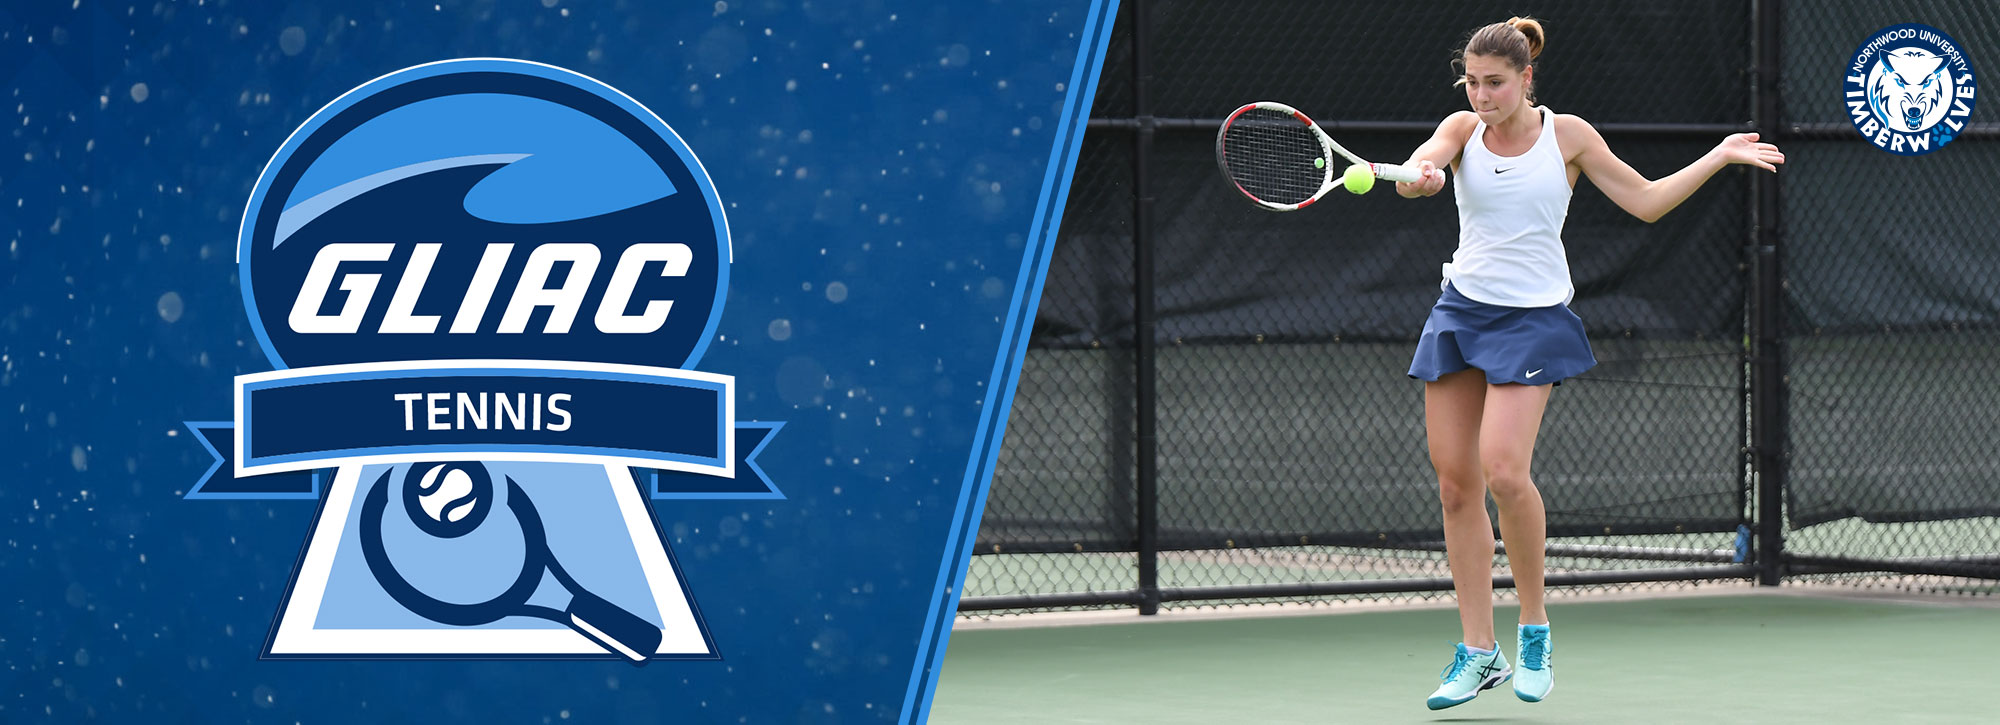 Northwood's Payvch Named GLIAC Women's Tennis Player of the Week